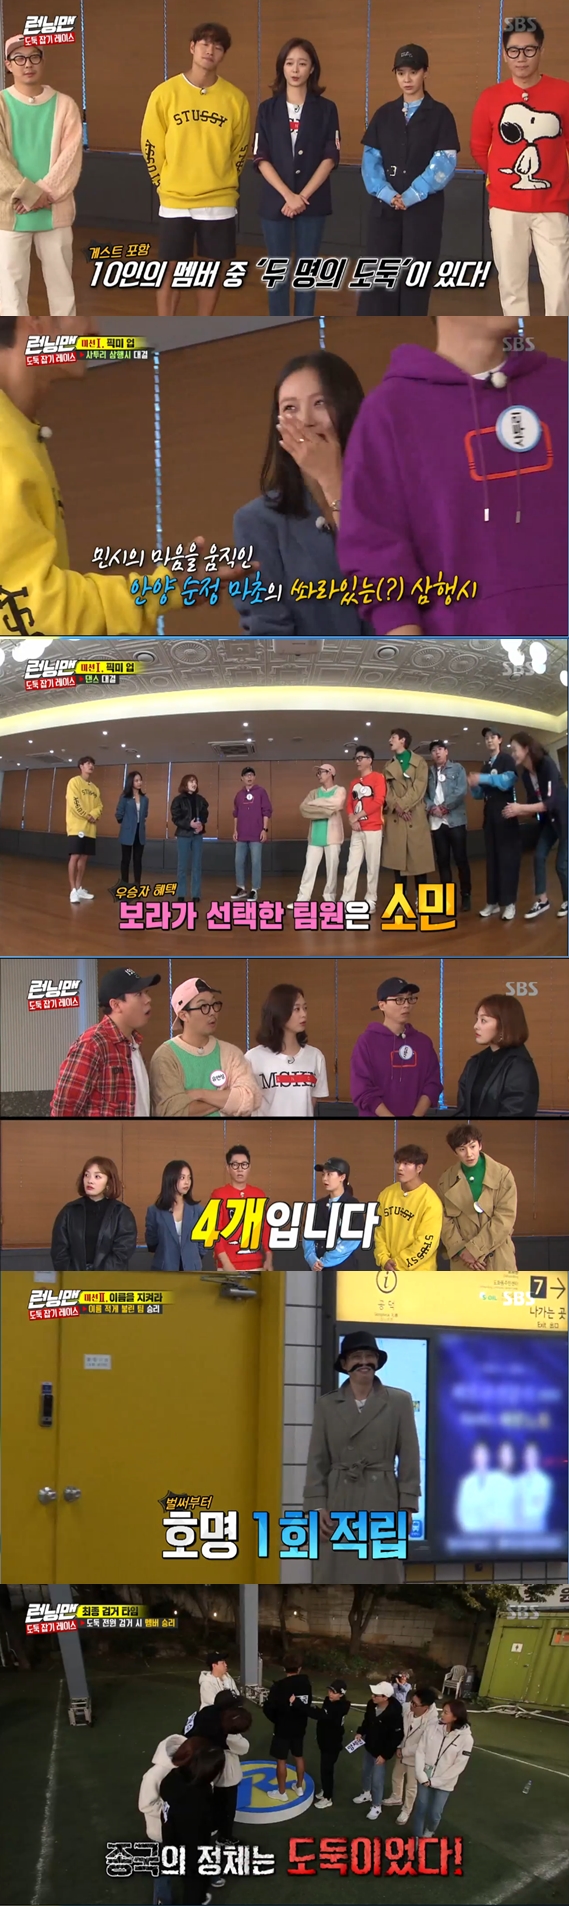 Kim Jong-kook and Yang Se-chan failed to commit burglariesIn the SBS entertainment program Running Man broadcasted on the afternoon of the 27th, Go Min-si and Hwang Bo Ra came out as guests and performed Trop Catch Race with the members.Yoo Jae-Suk introduced Go Min-si and said, I played as a new steward in the movie Witch . So the members were glad that they were not good actors next to the main character.In particular, Ji Suk-jin praised Go Min-sis appearance, saying, Did he look so beautiful?But then Ji Suk-jin made the mistake of asking, Did he die there at the end?Go Min-si replied coldly, I survived to the end, and the members criticized Ji Suk-jin for Do not pretend to see the movie.Yoo Jae-Suk then introduced Hwang Bo Ra and said, Lee Kwang-soo has a relationship with the drama Anturaji.Lee Kwang-soo said, My sister is really good in character. So Hwang Bo Ra was embarrassed to ask, I am my sister.She then said, Im old. When Ji Suk-jin said, Im 82 years old, Hwang Bo Ra said, Im 83 years old.Yoo Jae-Suk emphasized that Hwang Bo Ra is a talent bond 10, she said.Ji Suk-jin also looked shrunk in the unflinching appearance of Hwang Bo Ra.Yoo Jae-Suk teased Ji Suk-jin, saying, Ji Suk-jin is a person with a lot of gardening, but Ive never seen this before.Before the full-scale race began, the crew told them to form a team through a simple mission.Running Man members had to wait for the Choices of the two after Choices were performed by the crew.Yoo Jae-Suk and Kim Jong-kook, who challenged the dialect, gave a big smile with a clumsy dialect.Go Min-si, who won first place, Choices Kim Jong-kook, who impressed her with a dialectic triangular poem.The following mission was dance; Hwang Bo Ra, Jeon So-min, and Song Ji-hyo, who danced Choices, danced to classical club songs.In particular, Jeon So-min and Hwang Bo Ra fell into their dance world and became the top candidates.The Choices of the members were Hwang Bo Ra, and Hwang Bo Ra selected his own exaggerated Jeon So-min as a team member.Ji Suk-jin and Lee Kwang-soo joined the Go Min-si team, and Haha and Yang Se-chan joined the Hwang Bo Ra team.Only the team configuration mission was over, but the number of Hidden missions carried out by the thief reached four.When the team was finished, the crew surprised the members by saying, There are four gold bars acquired by thieves. The members suspected Yoo Jae-Suk, who performed a lot of missions.Go Min-si, who had the right to exchange teams, decided to bring Yang Se-chan and send Ji Suk-jin.The second mission that members will perform while the thief is conducting the Hidden mission was Protect your name.Members were dressed up and appeared at the subway station and had to be called to a minimum to win the mission.In the Hwang Bo Ra team, Yoo Jae-Suk was represented by Lee Kwang-soo in the Go Min-si team and performed the mission.The production team handed over cell phones and transportation cards to the two representatives and instructed them to perform the mission at the Art Department at the Gongdeok station.Before they went to the subway station, the two men had a nervous battle.At the moment of the crossroads, Yoo Jae-Suk called Lee Kwang-soos name, saying, Do well in the wilderness.The team members left in the recording site conducted a mission to give the two people who went out as representatives through Chamchae.The first runners, Hwang Bo Ra and Song Ji-hyo, did not understand the rules and made the members frustrated.Song Ji-hyo won the showdown, which ended at the end of twists and turns.As a result, the Go Min-si team had one penalty mission, and the Hwang Bo Ra team had two missions.Yoo Jae-Suk and Lee Kwang-soo, who were carefully heading to the Gongdeok station in their makeup, were embarrassed when the crew delivered the mission.In particular, Yoo Jae-Suk was once named to the citizens before the mission was carried out.Then, asking the way, Yoo Jae-Suk continued to be named, and the Hwang Bo Ra team became more faded.Yoo Jae-Suk laughed at the citizens by saying, I should not be Yoo Jae-Suk.Lee Kwang-soo was also embarrassed by citizens recognition during the dance on the street; the result of the tight game ended with Lee Kwang-soos victory.Then, in the confrontation between Song Ji-hyo and Jeon So-min, Jeon So-min won, but ended with a victory of Komishi.The second mission was over, but the number of thieves gold bullion did not decrease, so the members thought the thief was in one team.Even during the ensuing meal, thieves carried out the Hidden mission: after meals, the number of thieves gold bars was 10; one of the thieves was Yang Se-chan.Members were only suspicious that there would be thieves among Jeon So-min and Yang Se-chan, but not convinced.Members worked to catch the thief while performing the final mission; in the final mission, the Go Min-si team won and won the right to replace the team.Two thieves whose members Choices were Yang Se-chan and Kim Jong-kook.The number of gold bars acquired by Yang Se-chan was 8, and Kim Jong-kook won the team if the thief was right.But Kim Jong-kook was robbed, and ended with a victory for the members.